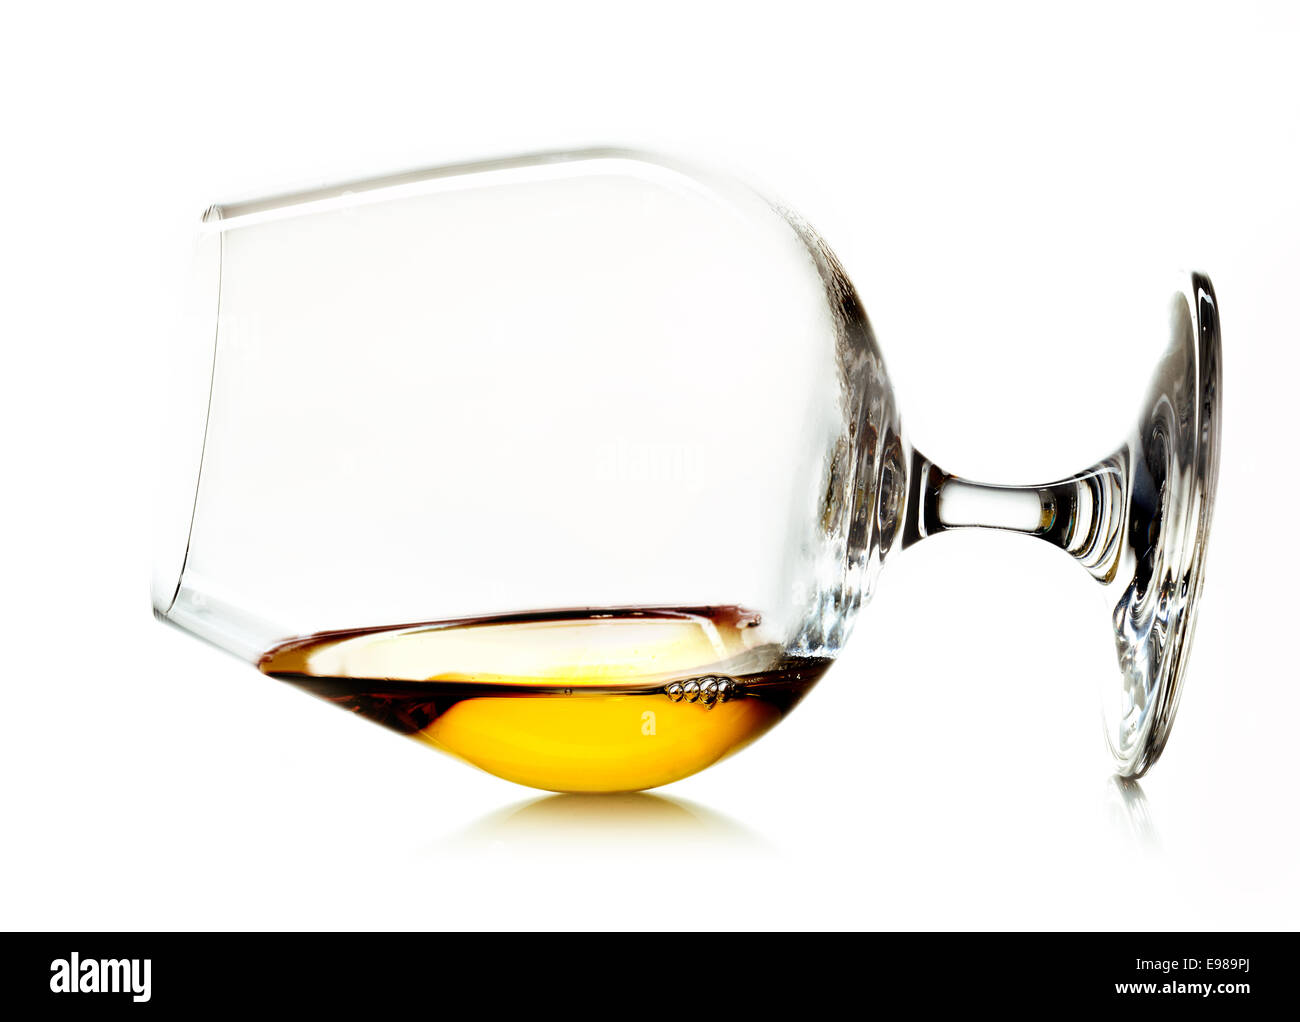 Glowing golden cognac or brandy in a snifter glass lying on its side on a white background Stock Photo